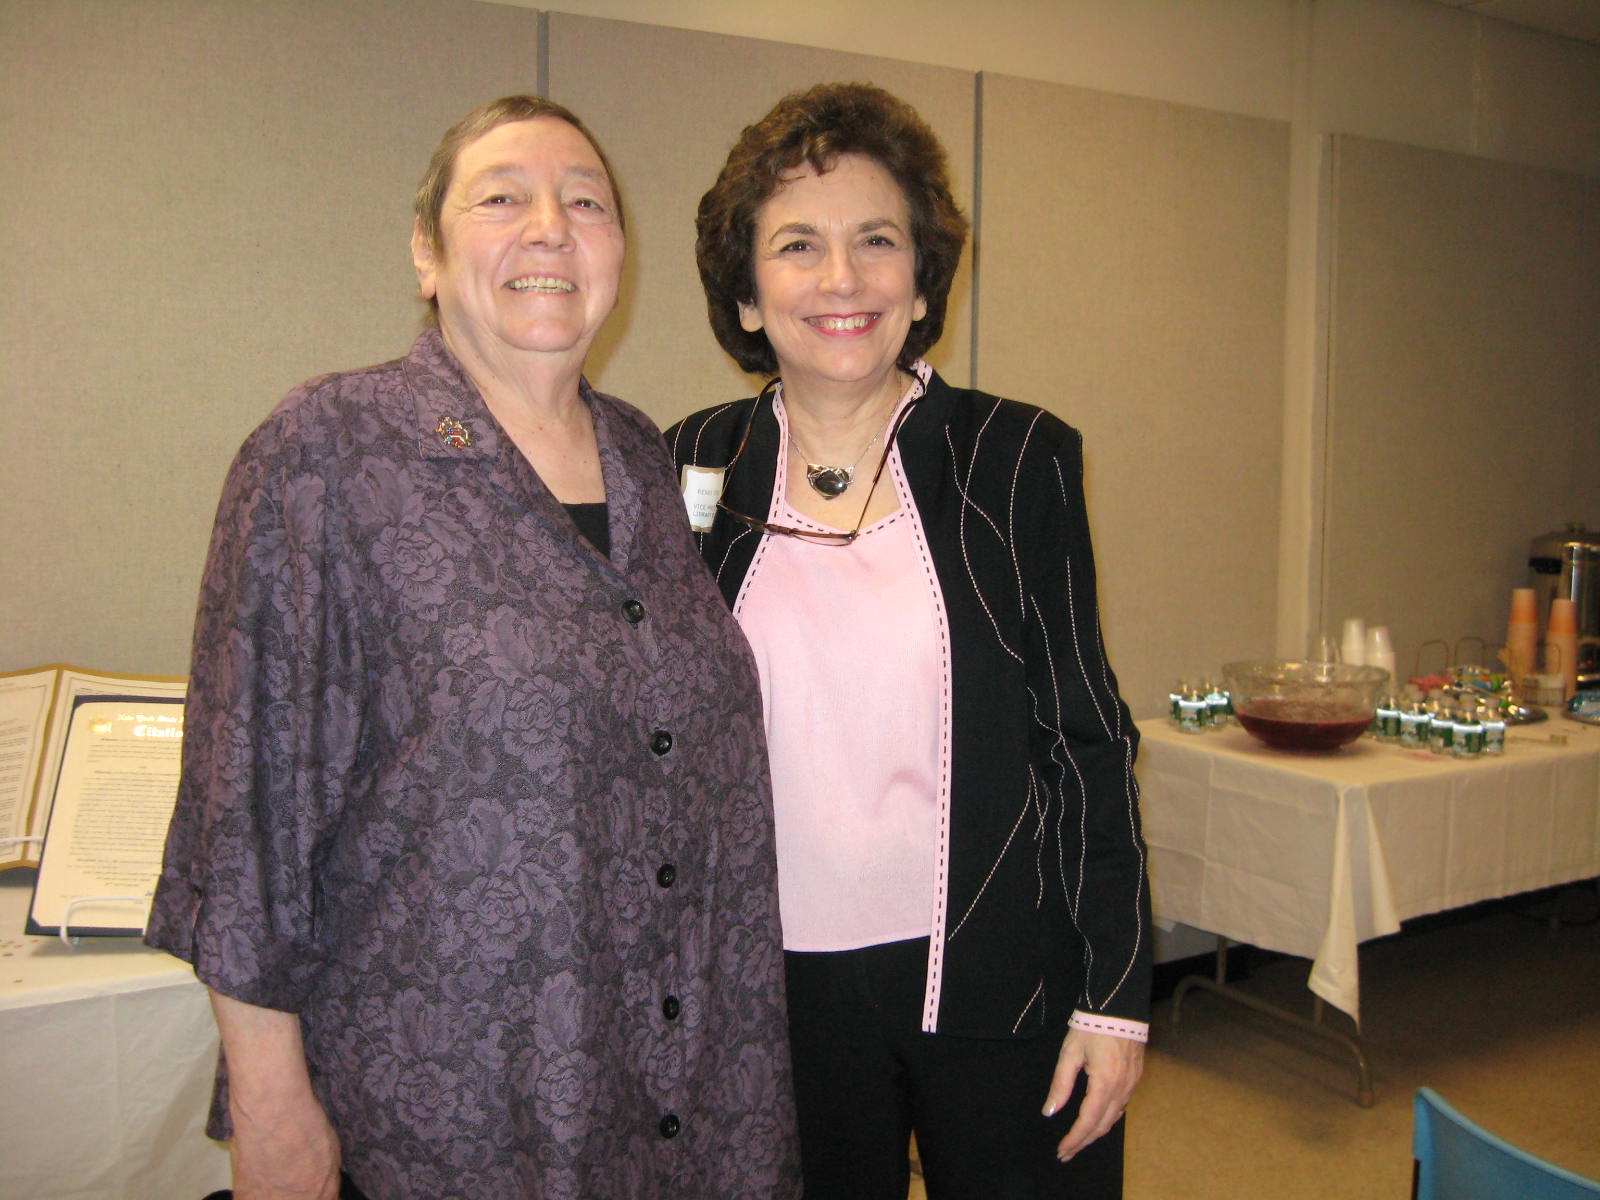 Image of board member Renee Steinig with the president of the school board attending the Half Hollow Hills Community Library's 50th Birthday celebration in April 2009